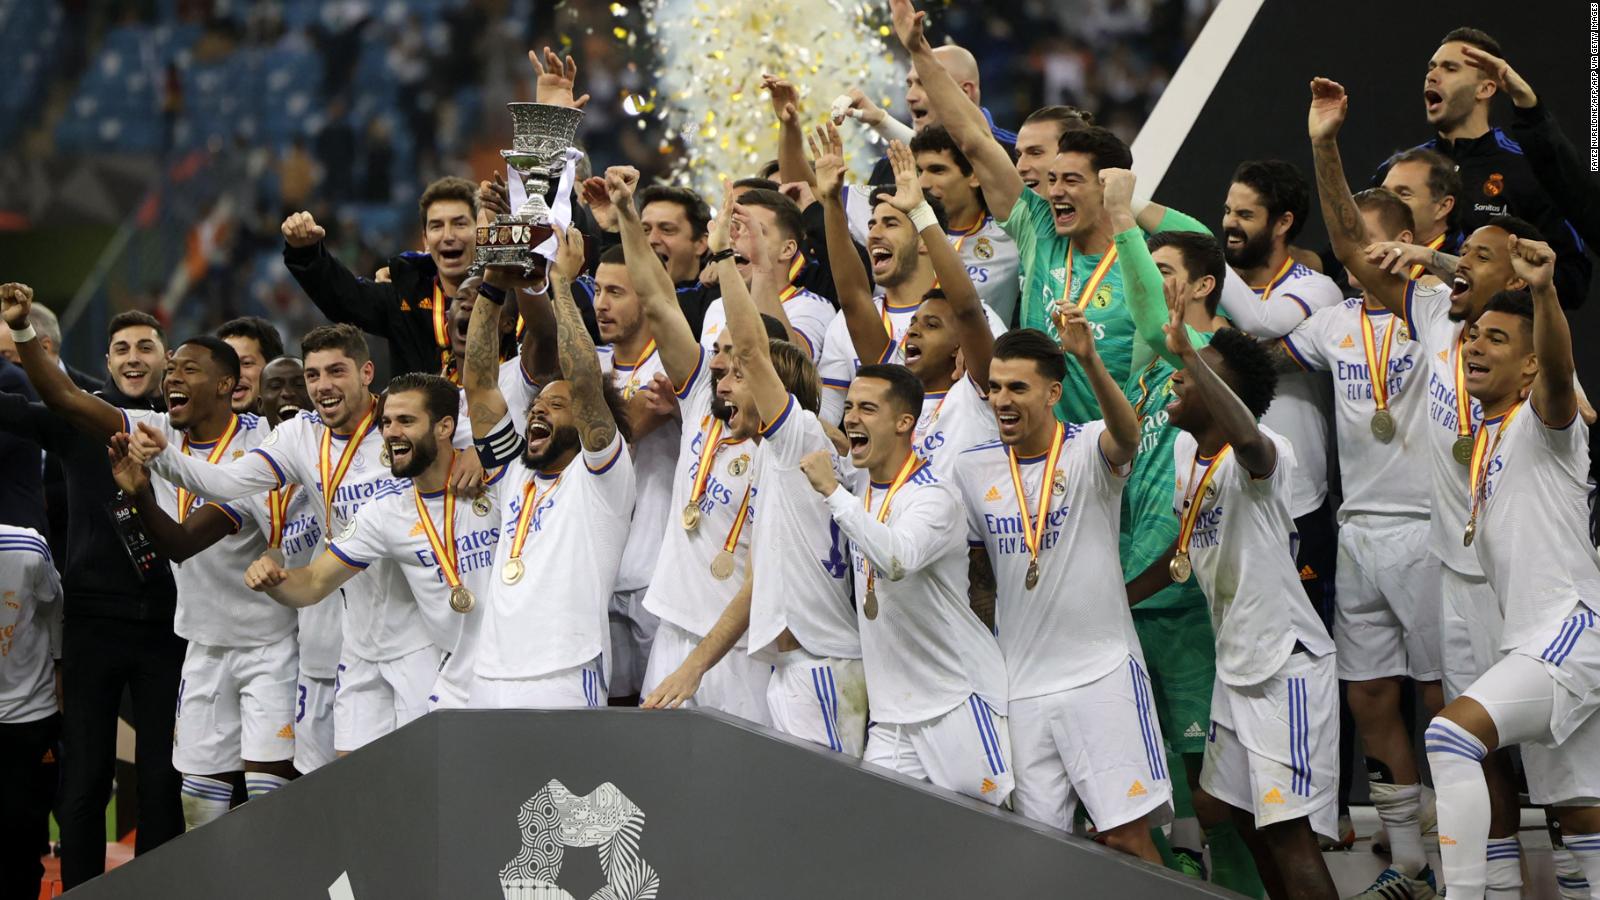 With the new Super Cup title, Real Madrid confirms that it